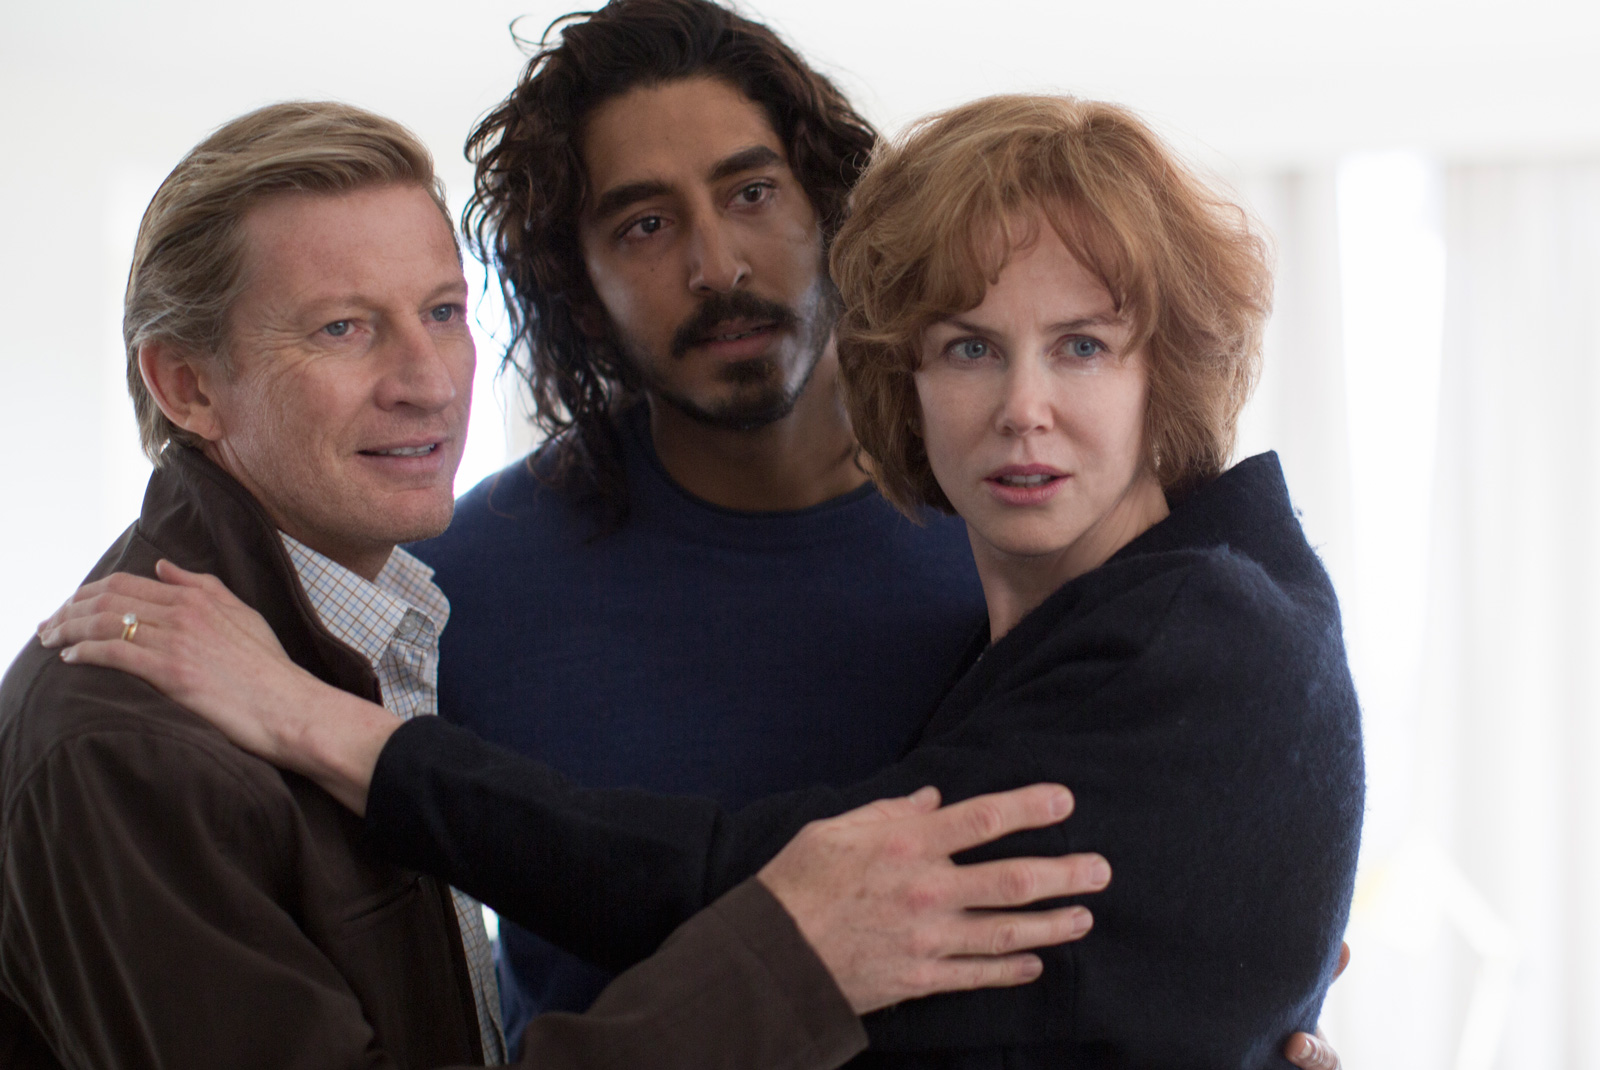 David Wenham, Dev Patel and Nicole Kidman holding on to each other in an affectionate family pose from the movie Lion